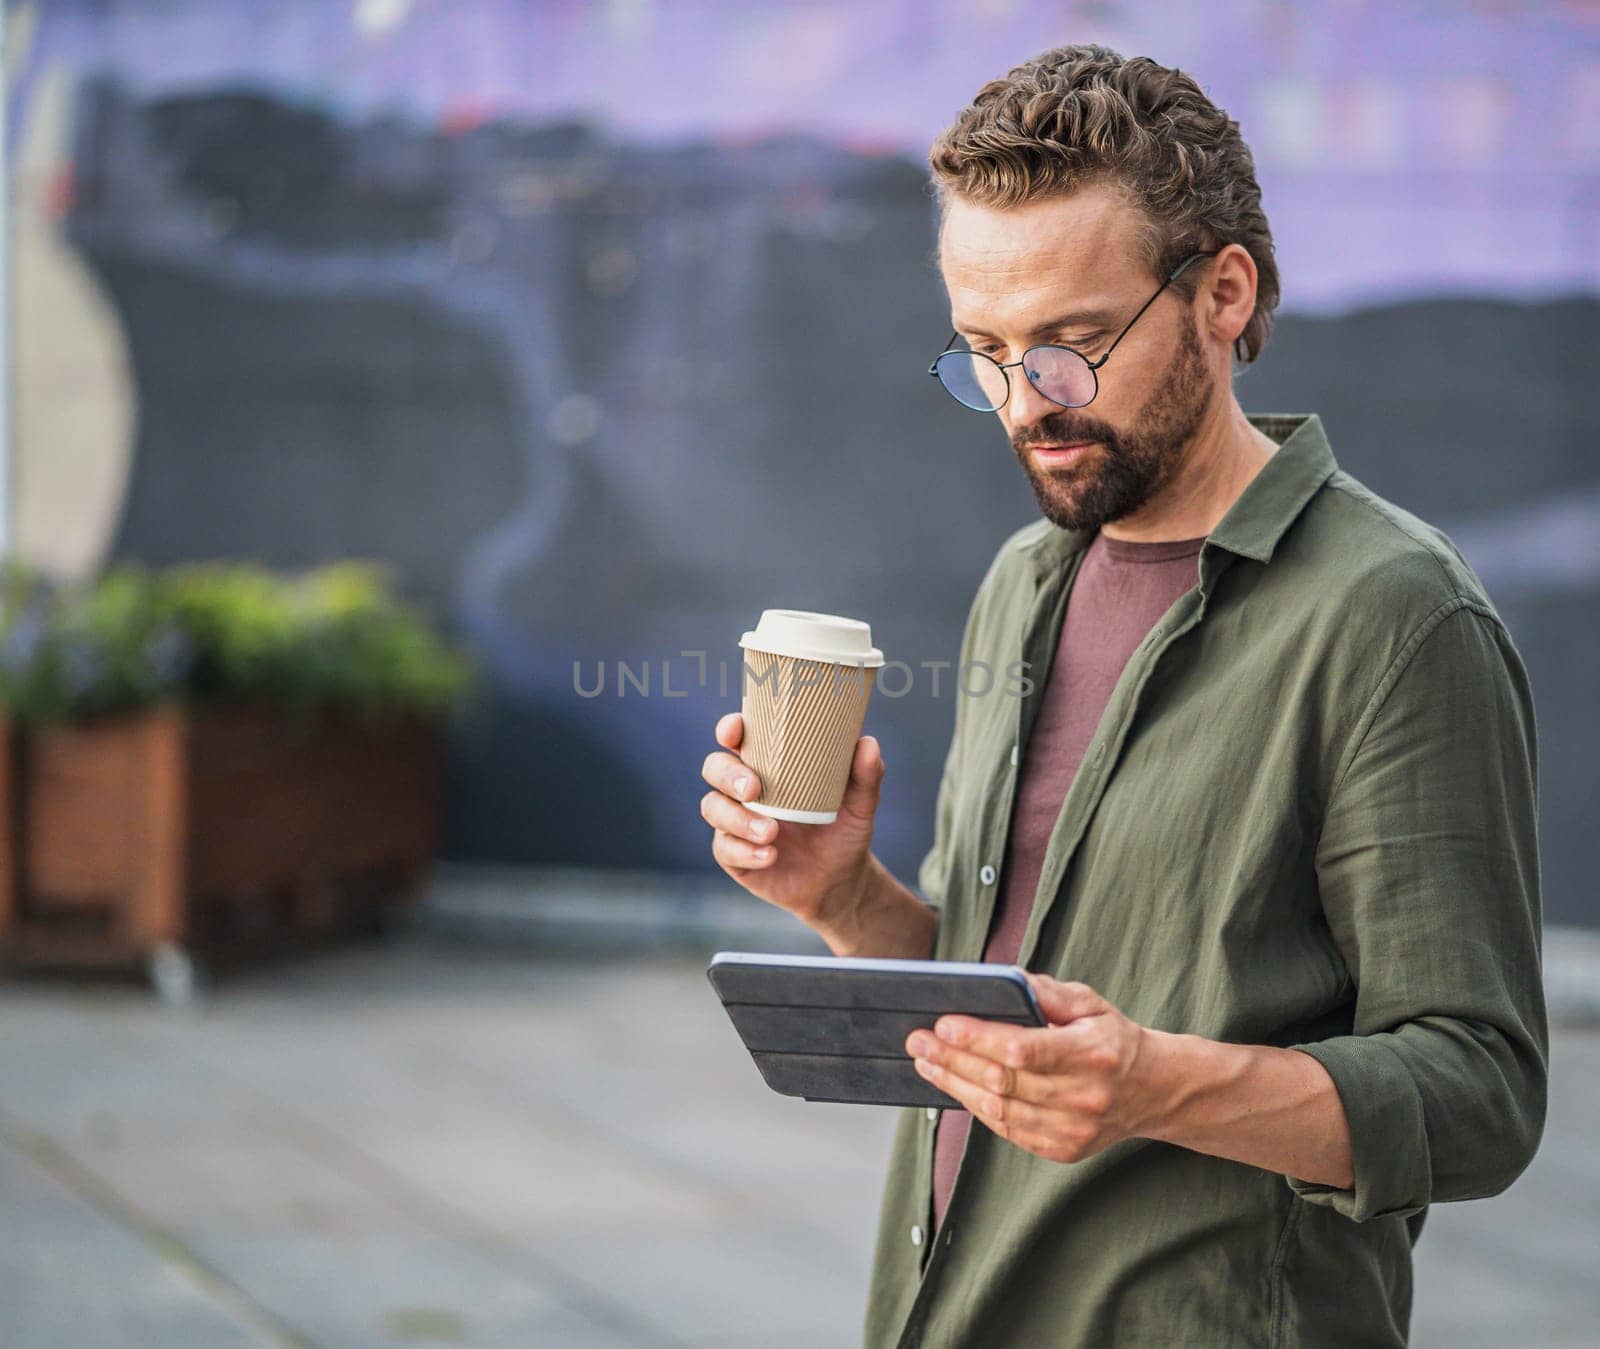 Man enjoying a coffee break outdoors while reading information from his tablet PC. The relaxed and serene atmosphere complements the combination of coffee and digital communication. by LipikStockMedia